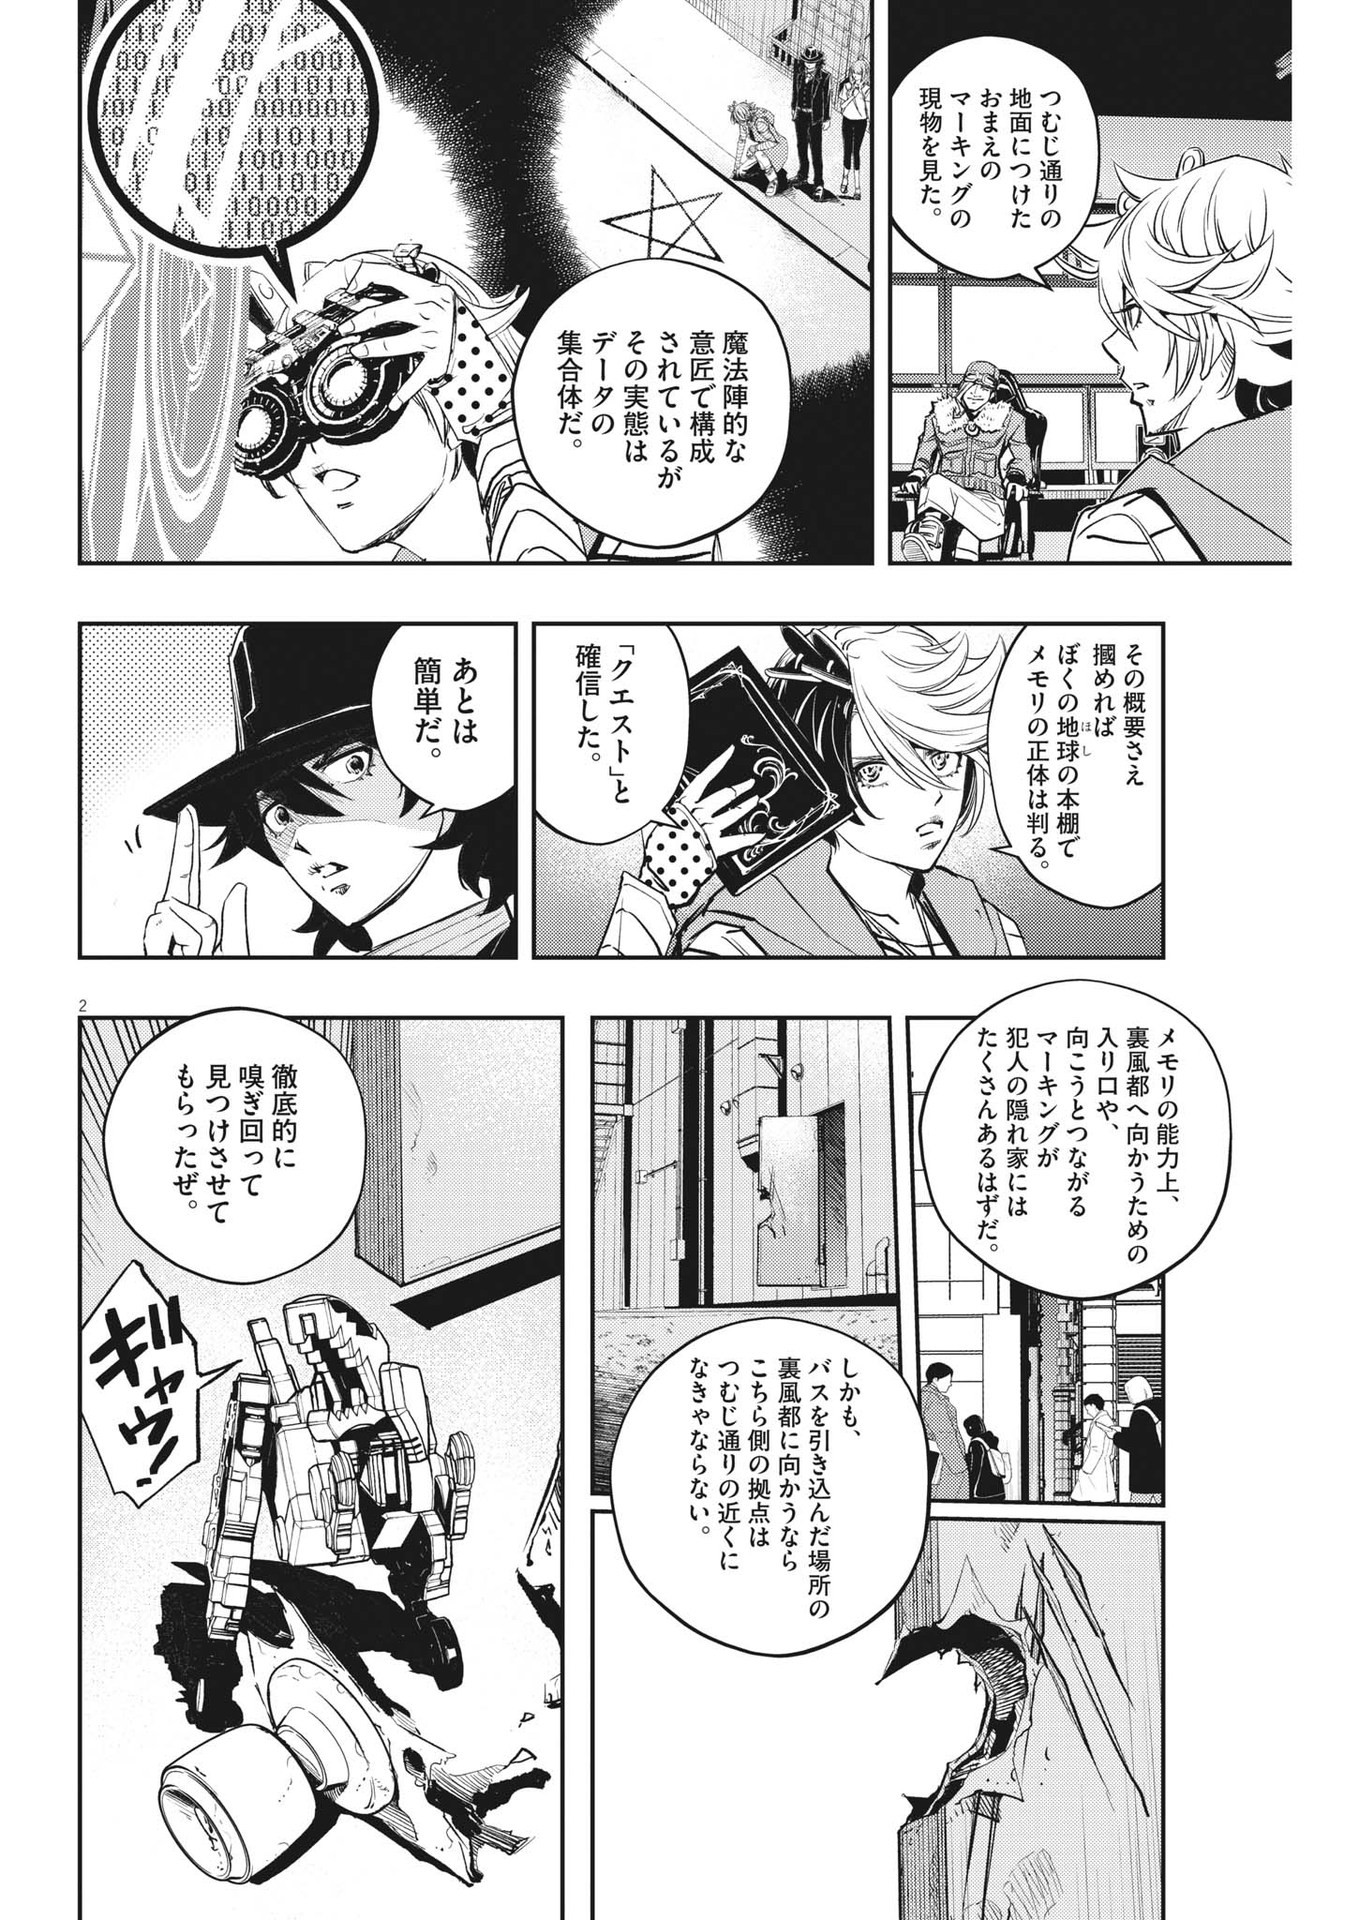 Kamen Rider W: Fuuto Tantei - Chapter 140 - Page 2